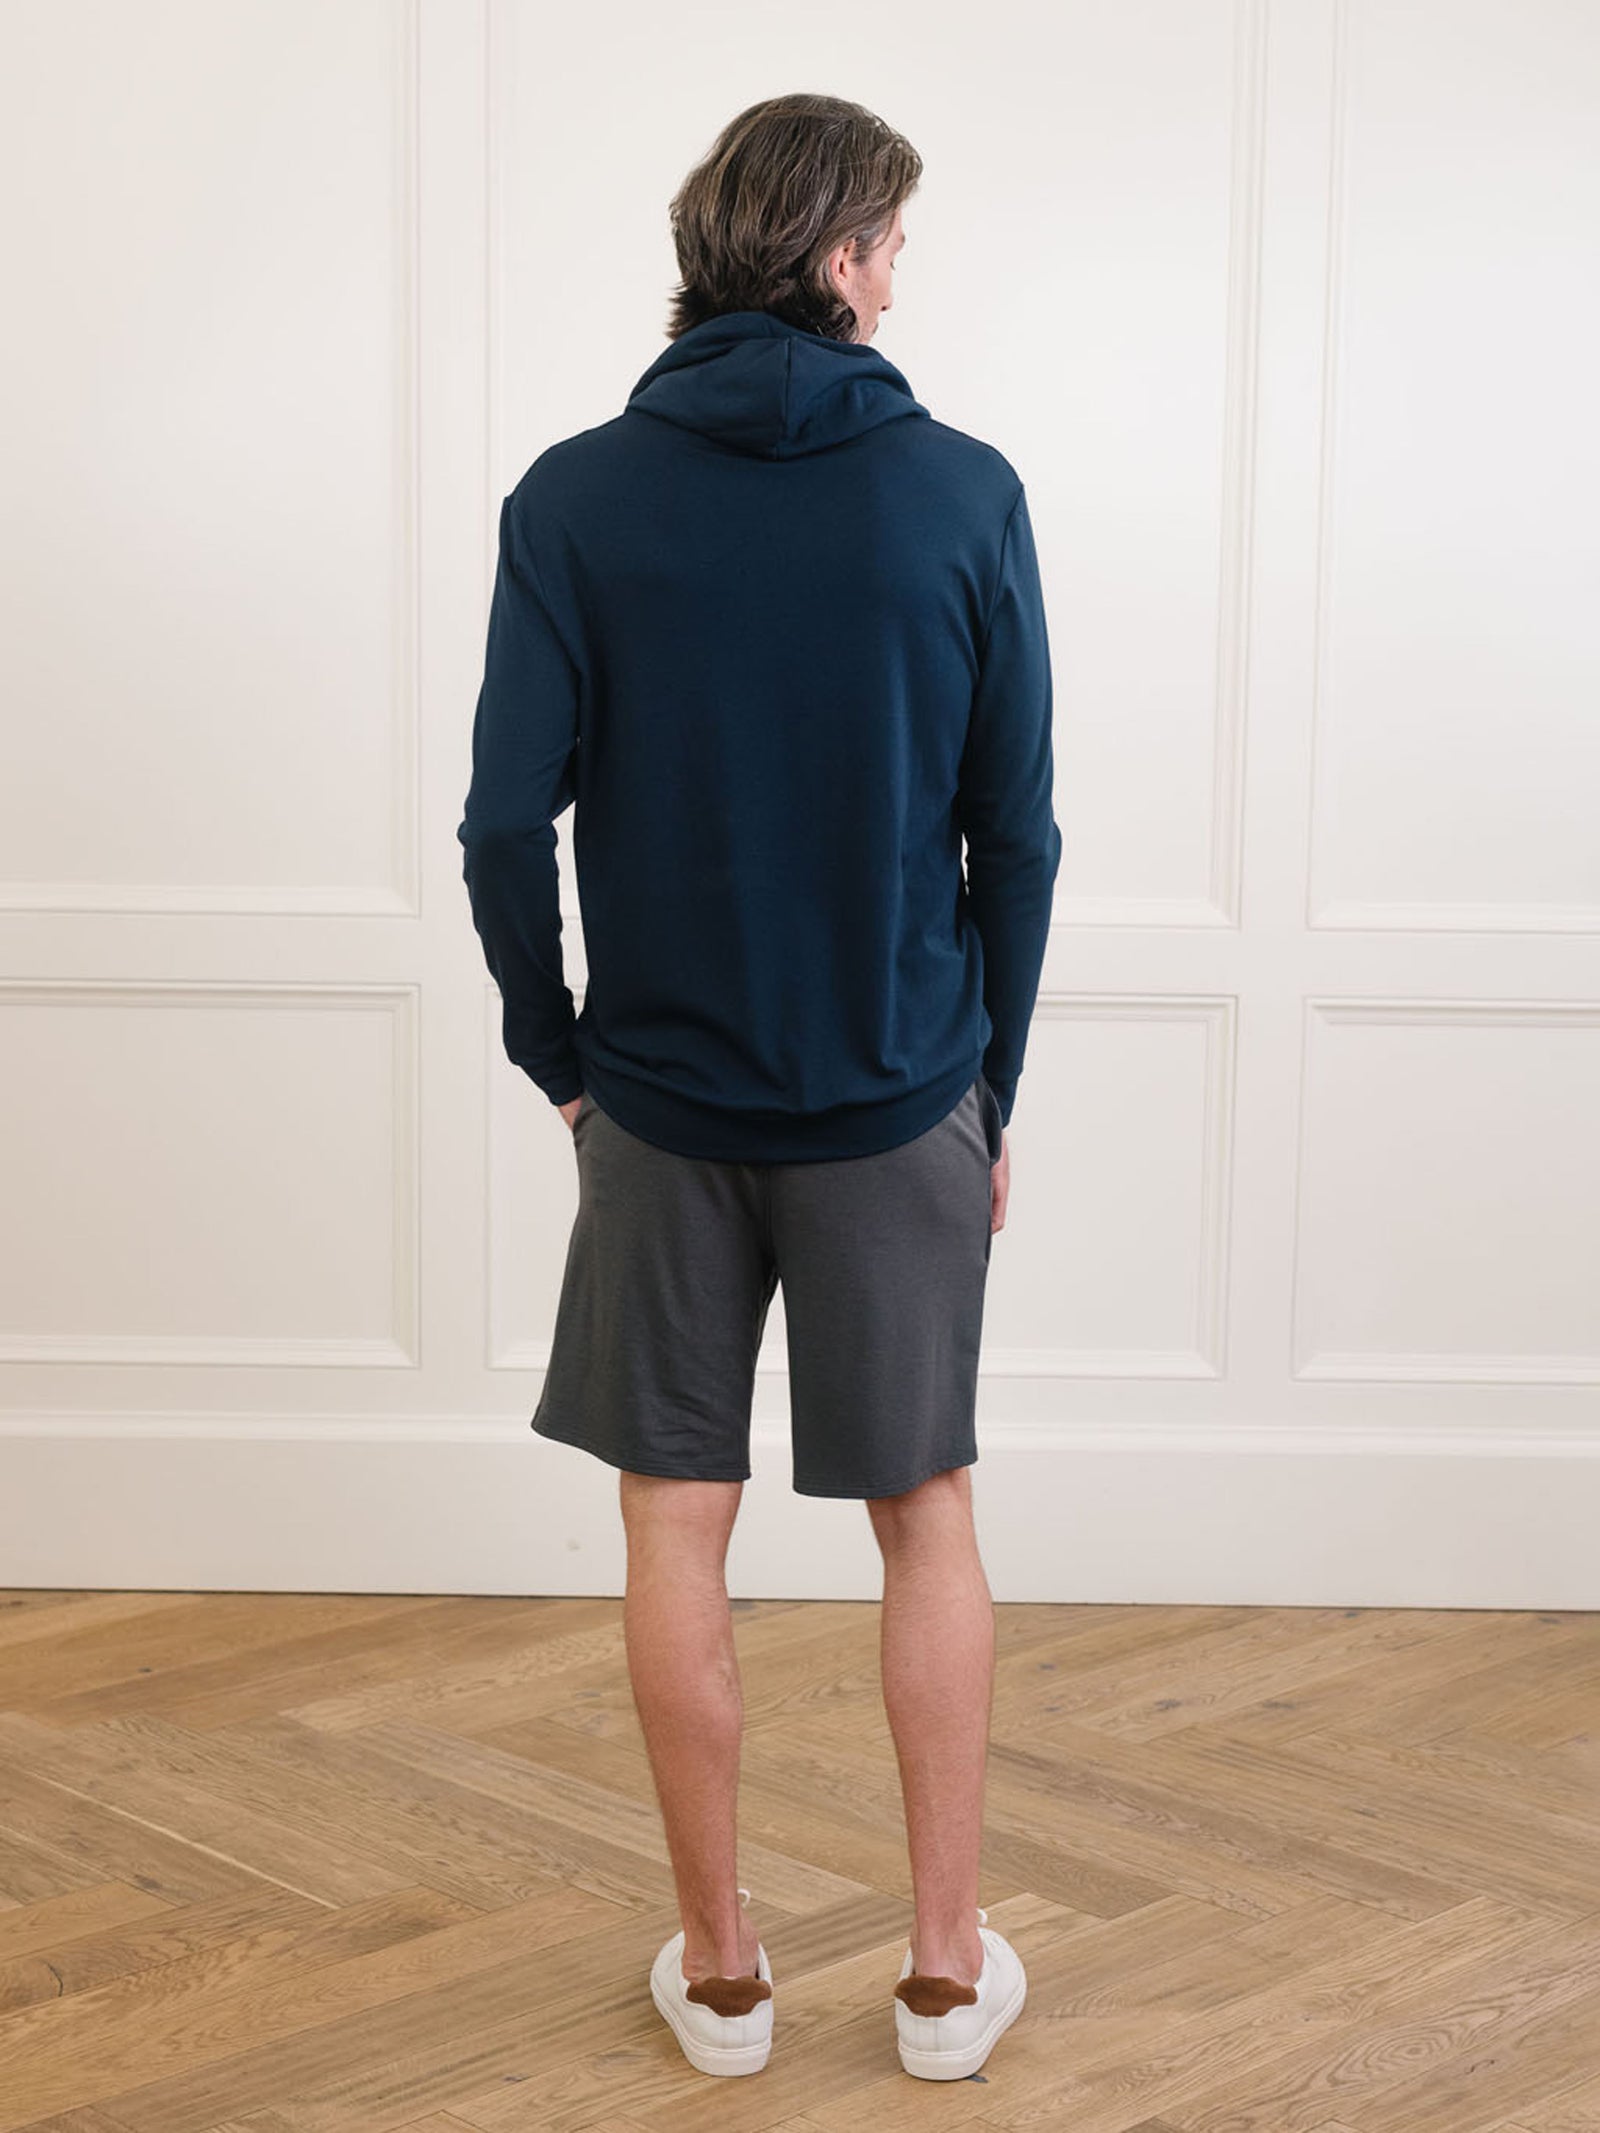 Navy Bamboo Hoodie worn by man standing in front of white background with his back facing the camera.